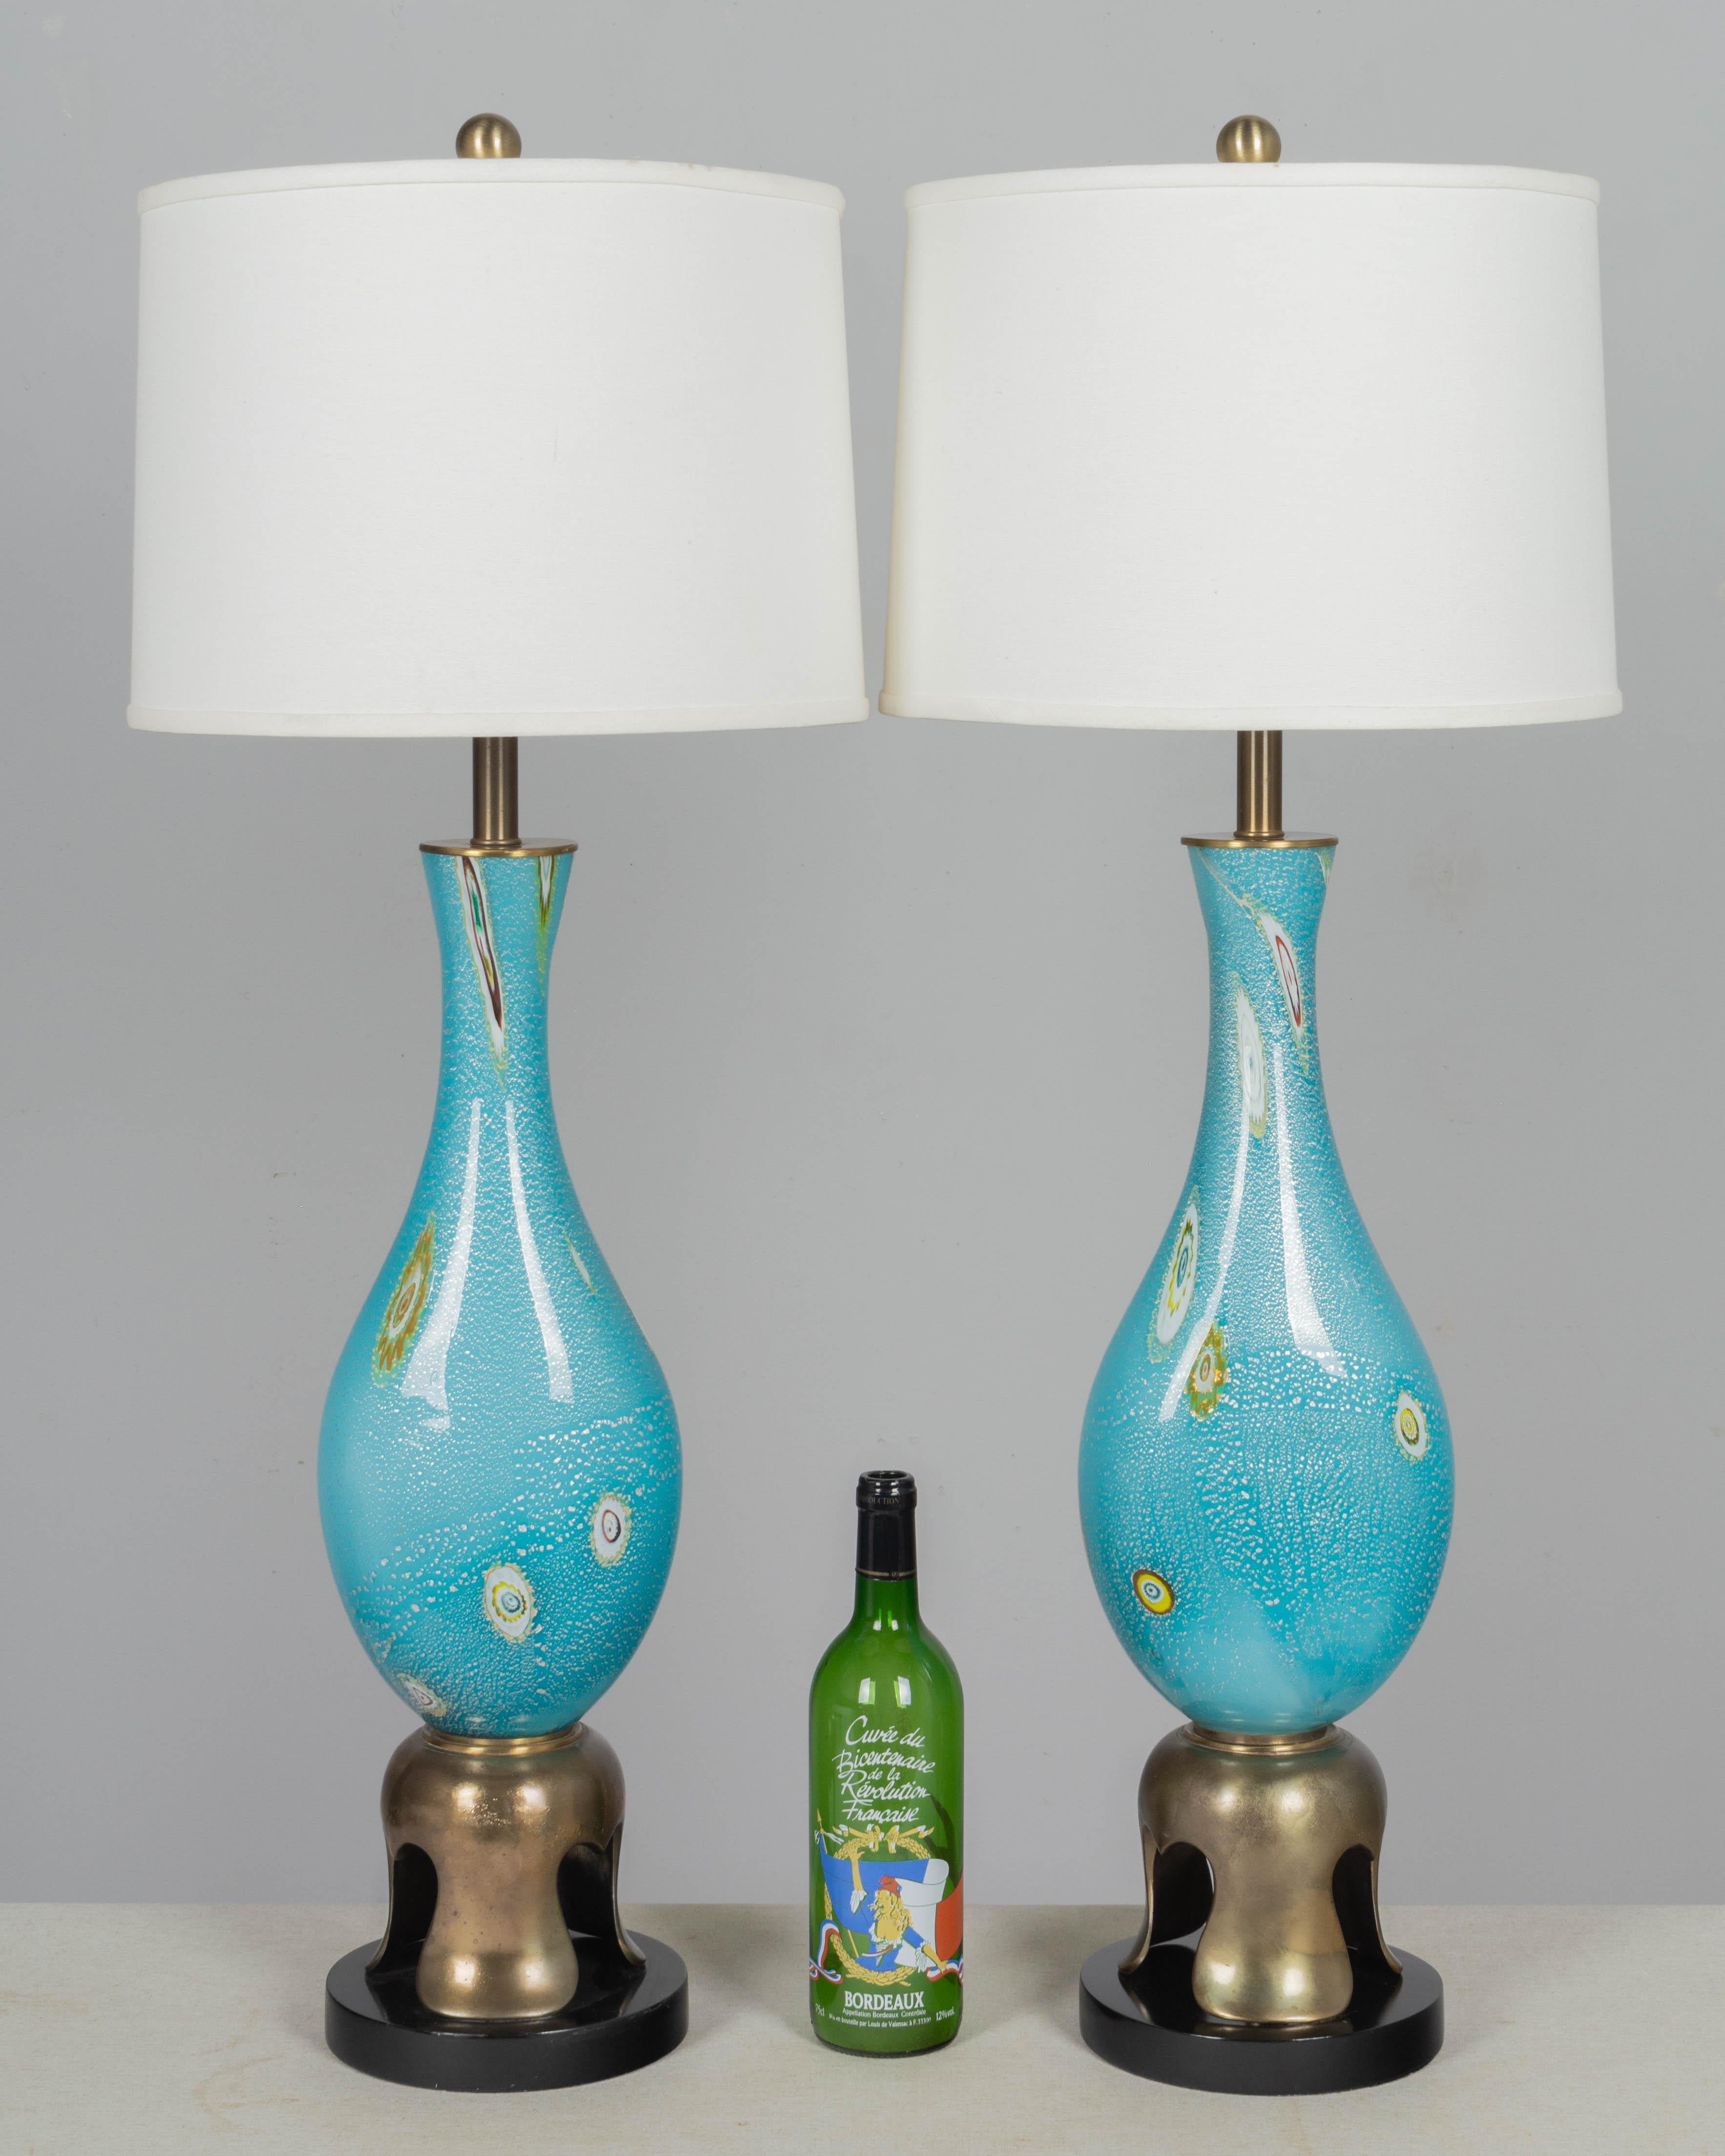 A pair of midcentury Murano art glass table lamps by Barovier & Toso. Hand blown aqua blue glass with colorful murrines and silver foil. Original brass tone cast brass and black painted wood bases, in the style of James Mont. Red foil label on one